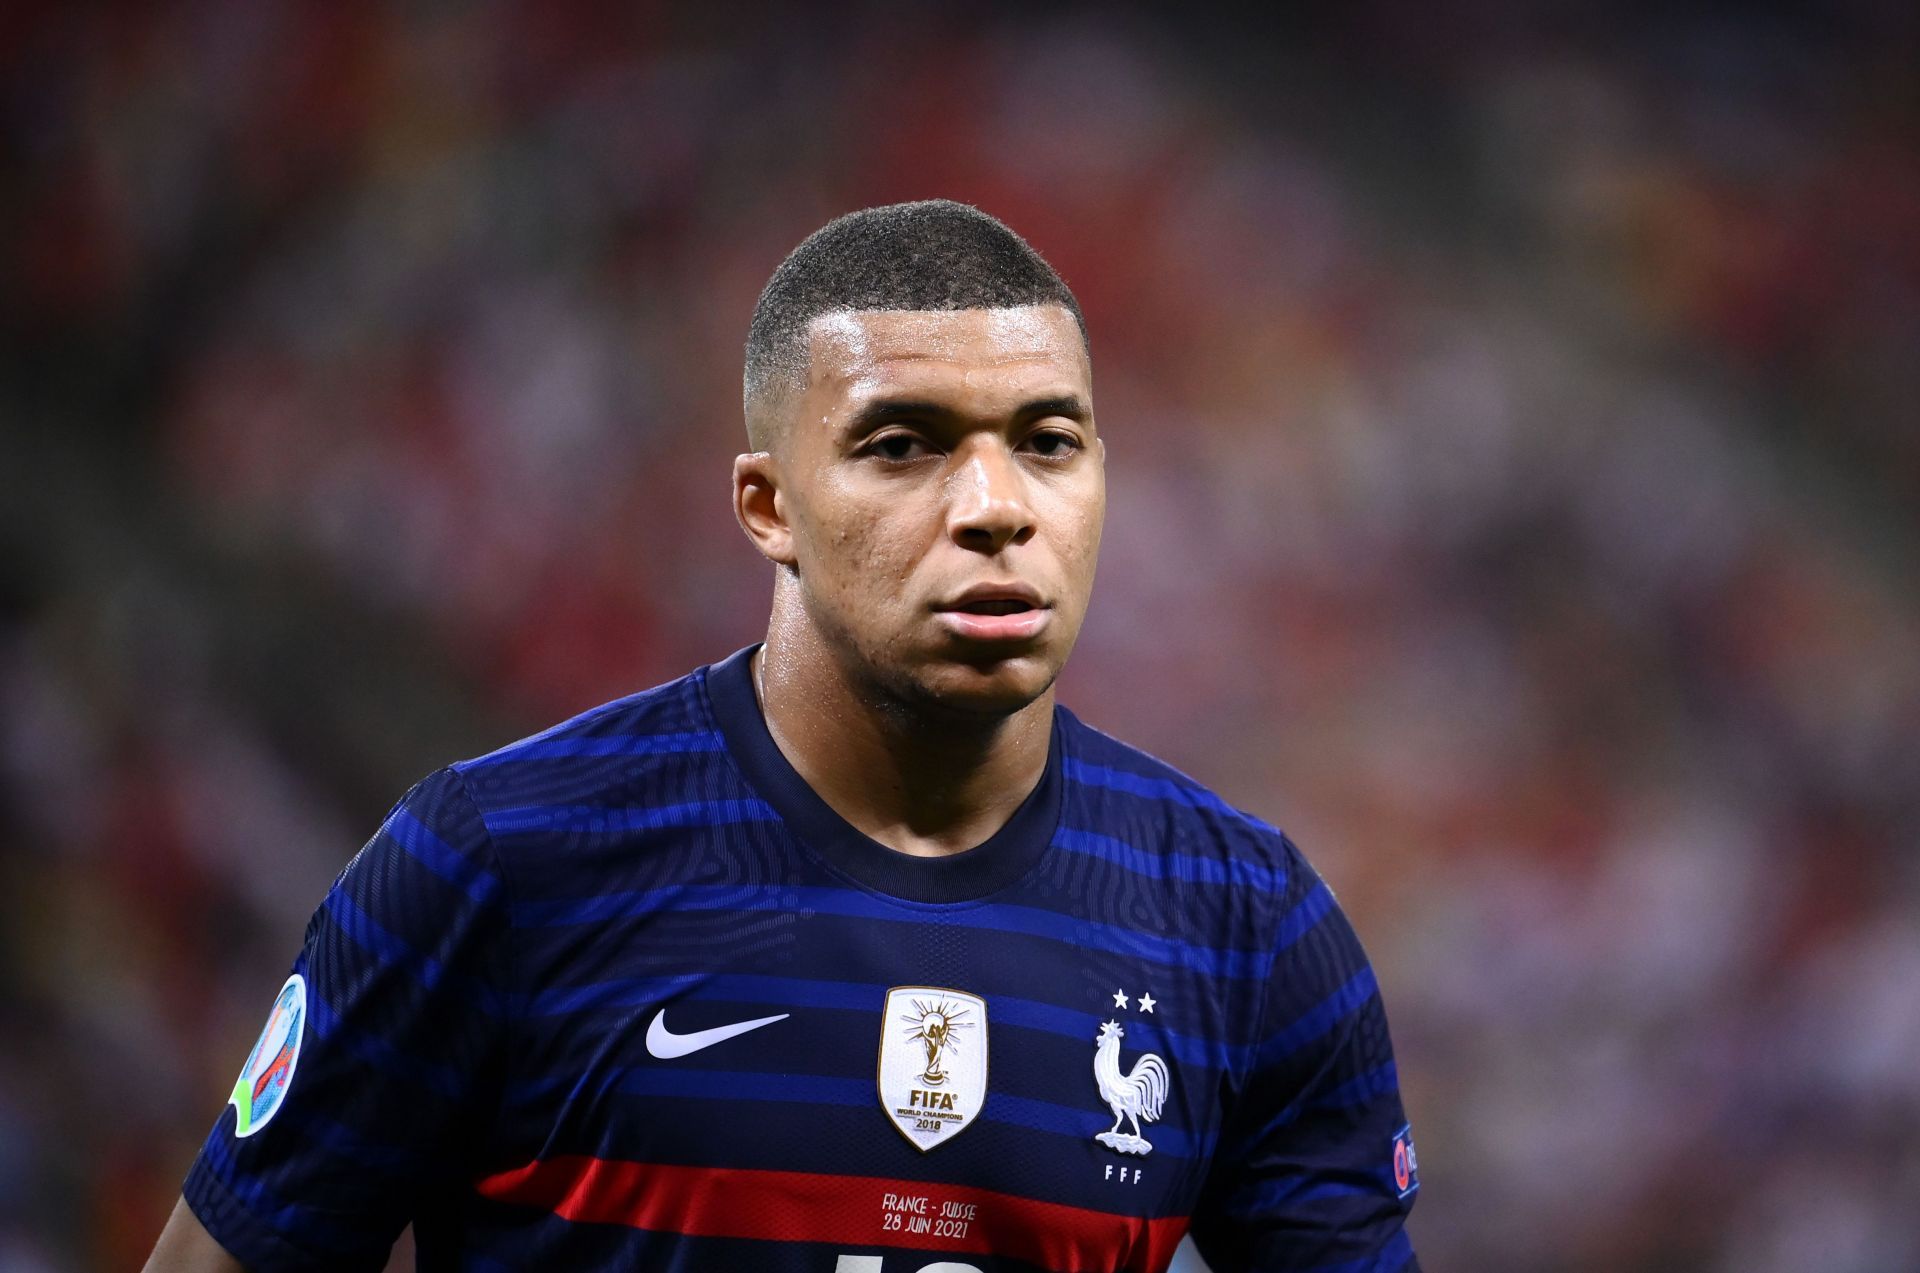 Mbappe in action for France during Euro 2020.